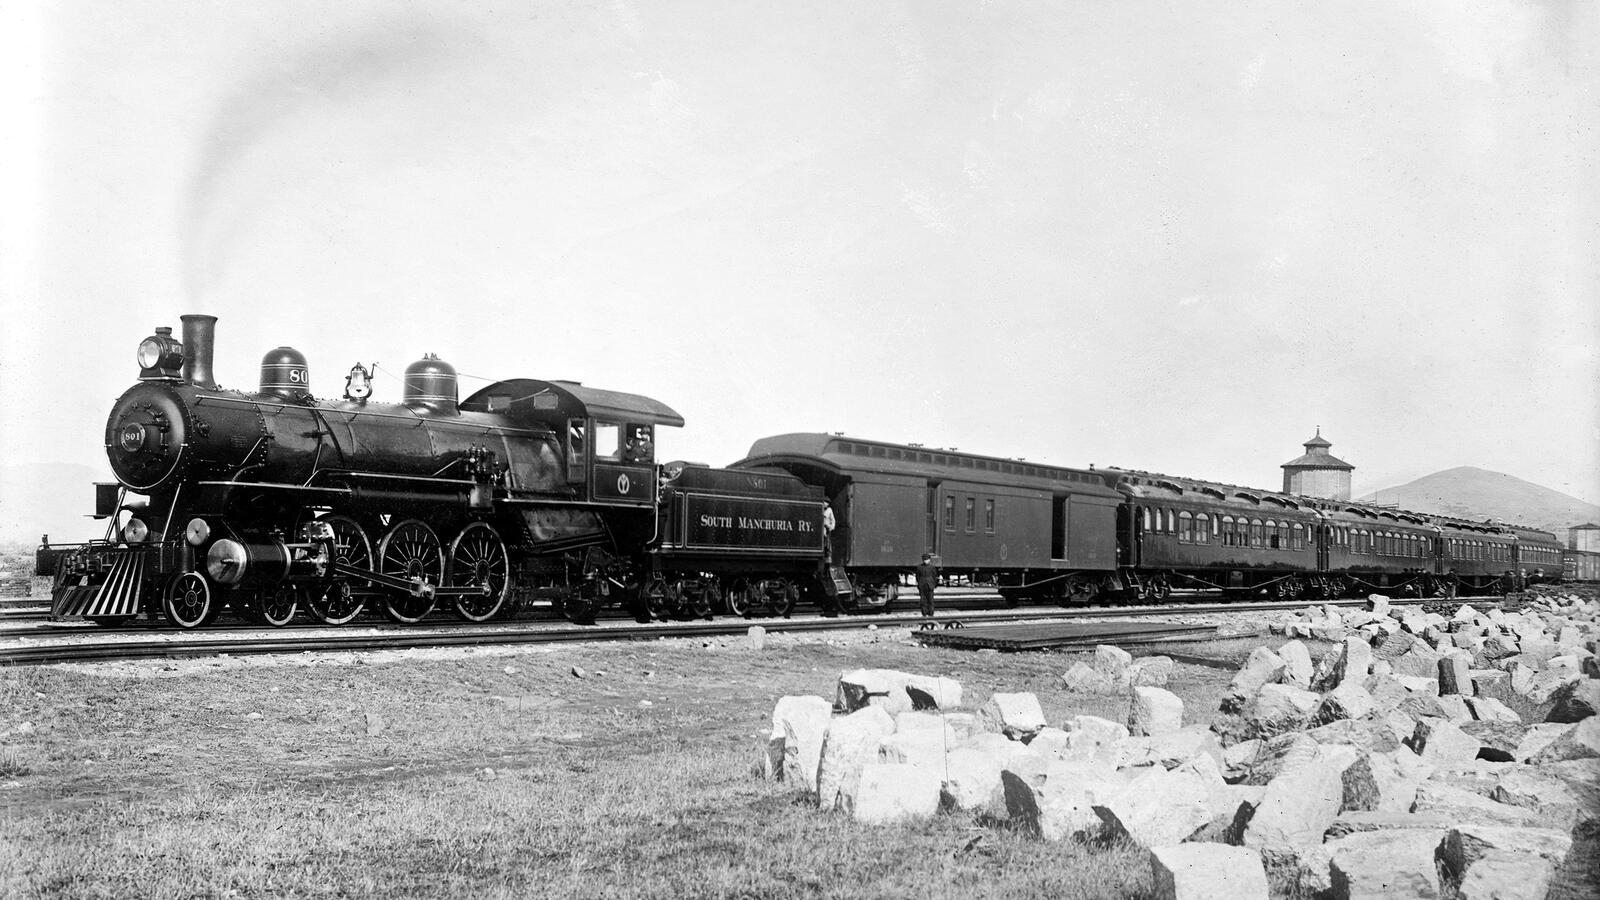 Free photo Steam locomotive in an old black and white photo